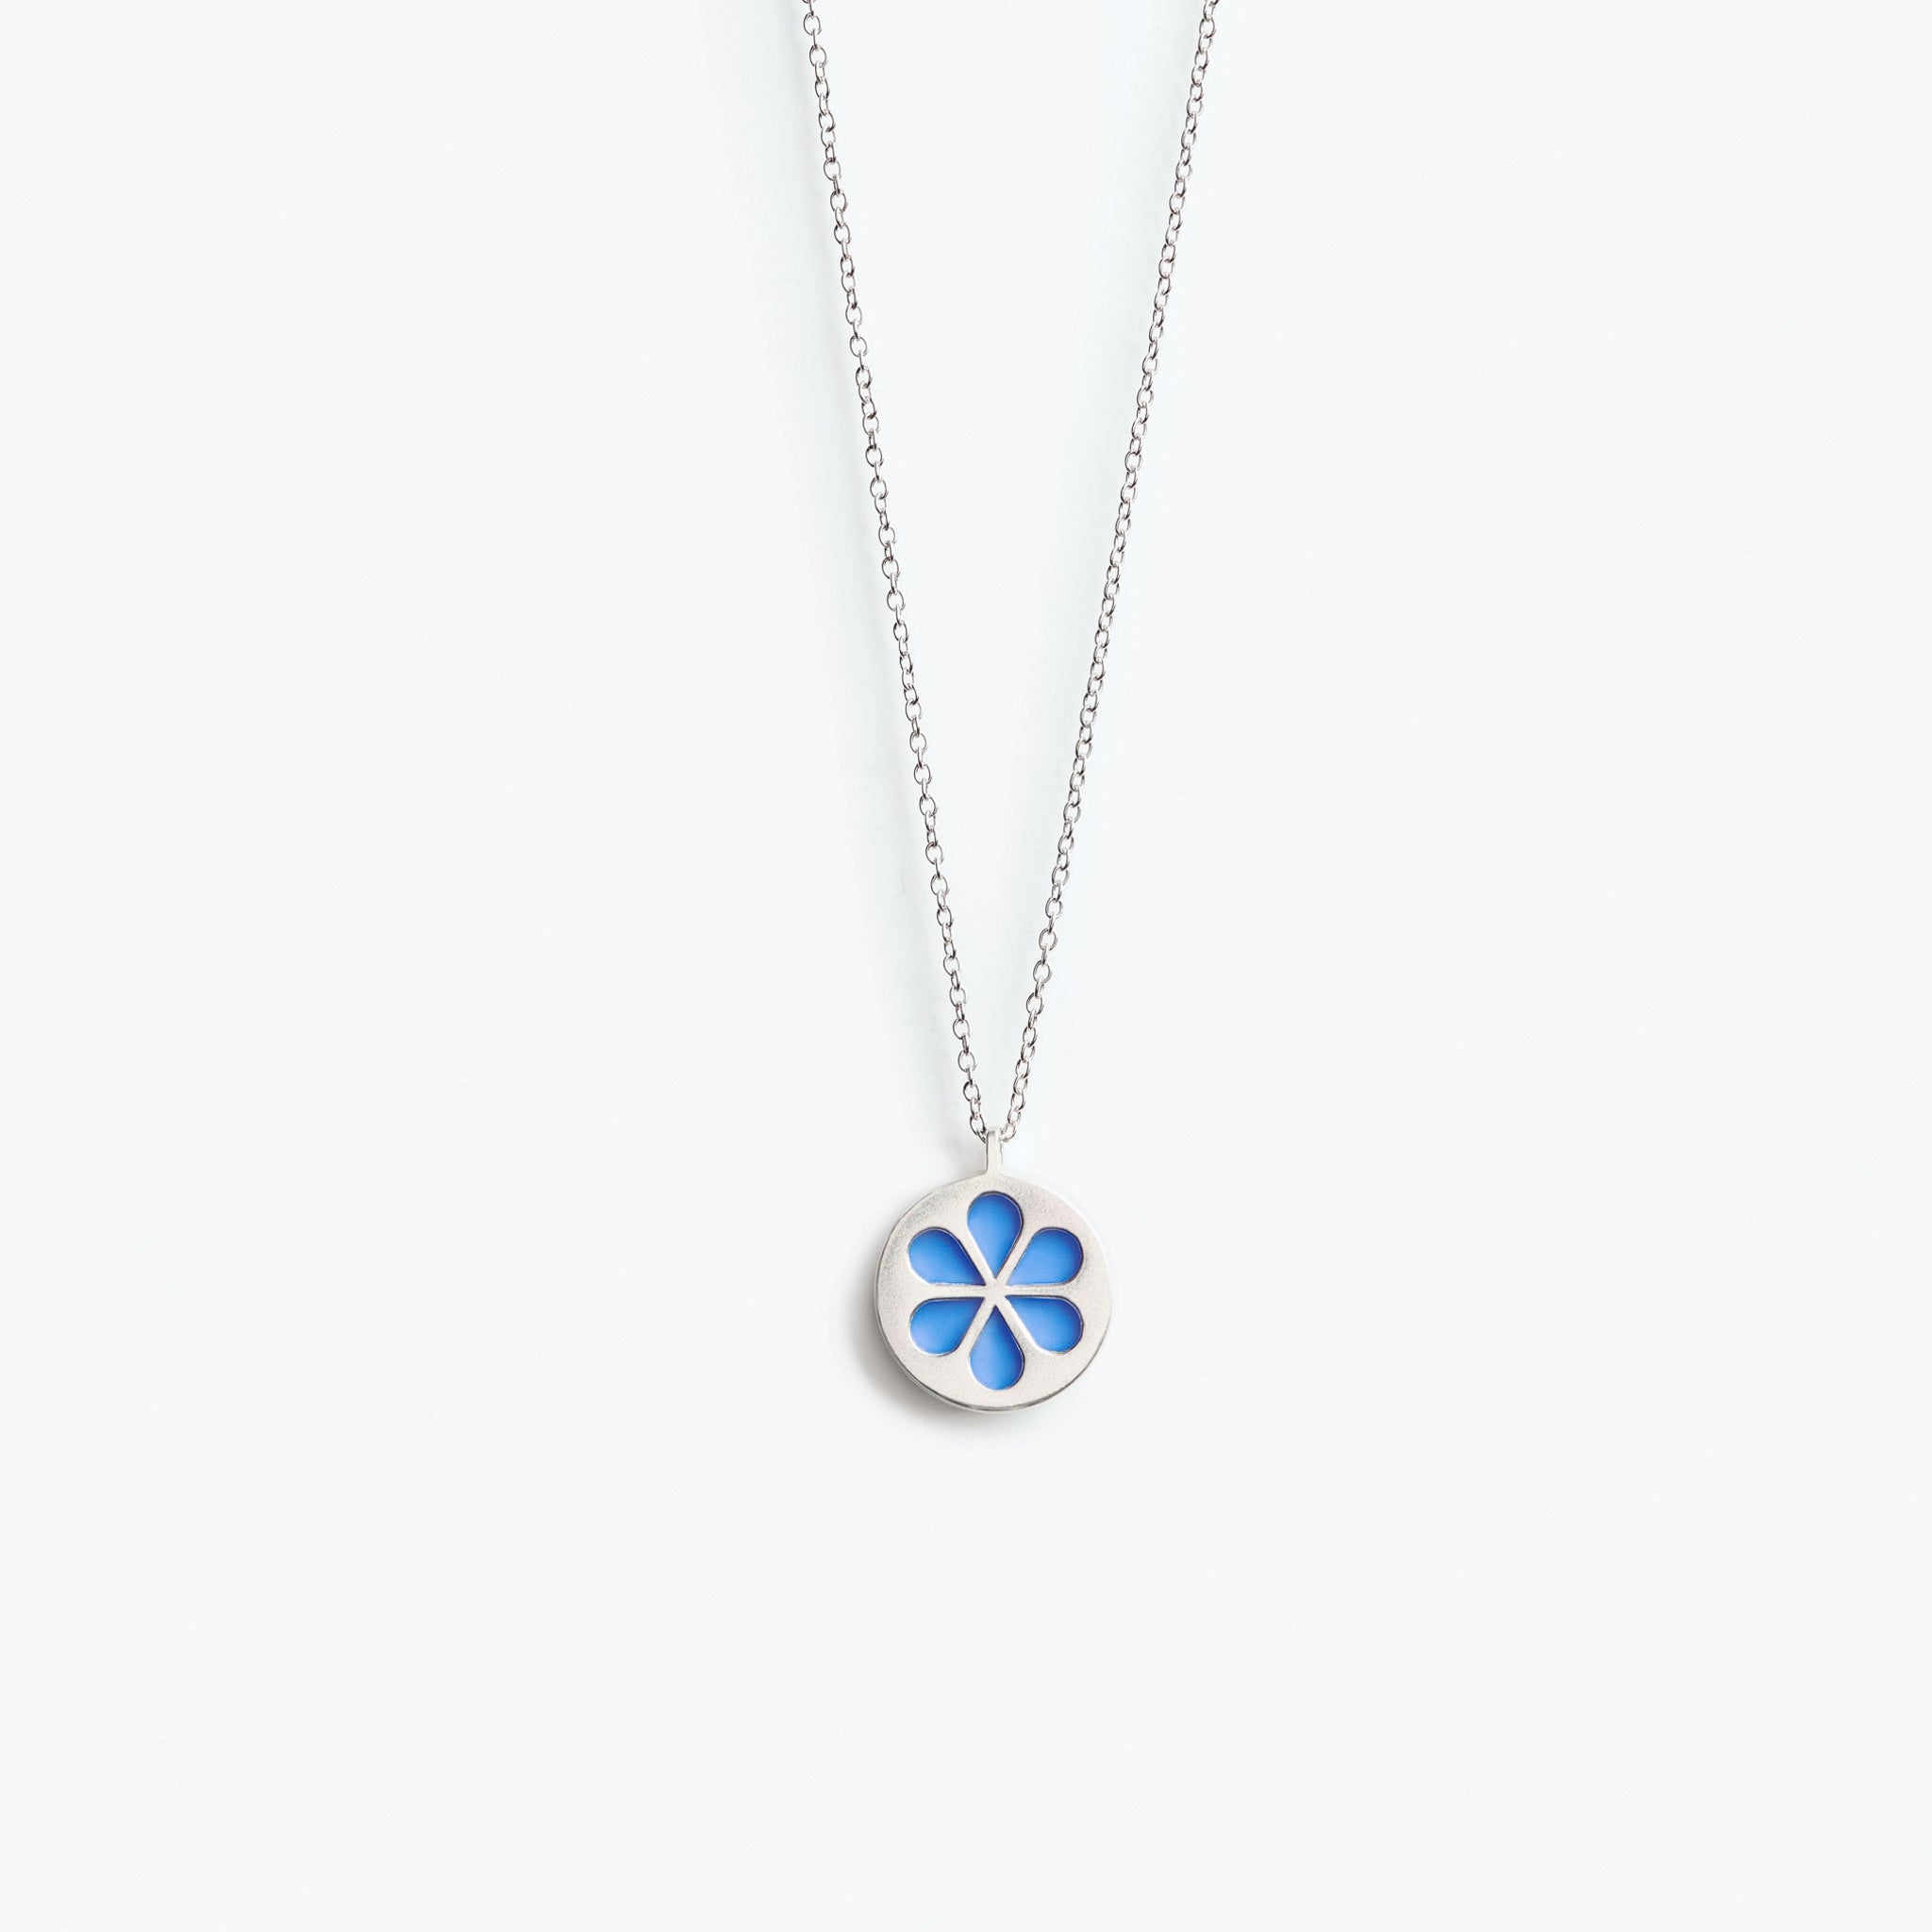 A simple bright blue flower pendant necklace, mounted on a fine trace chain.